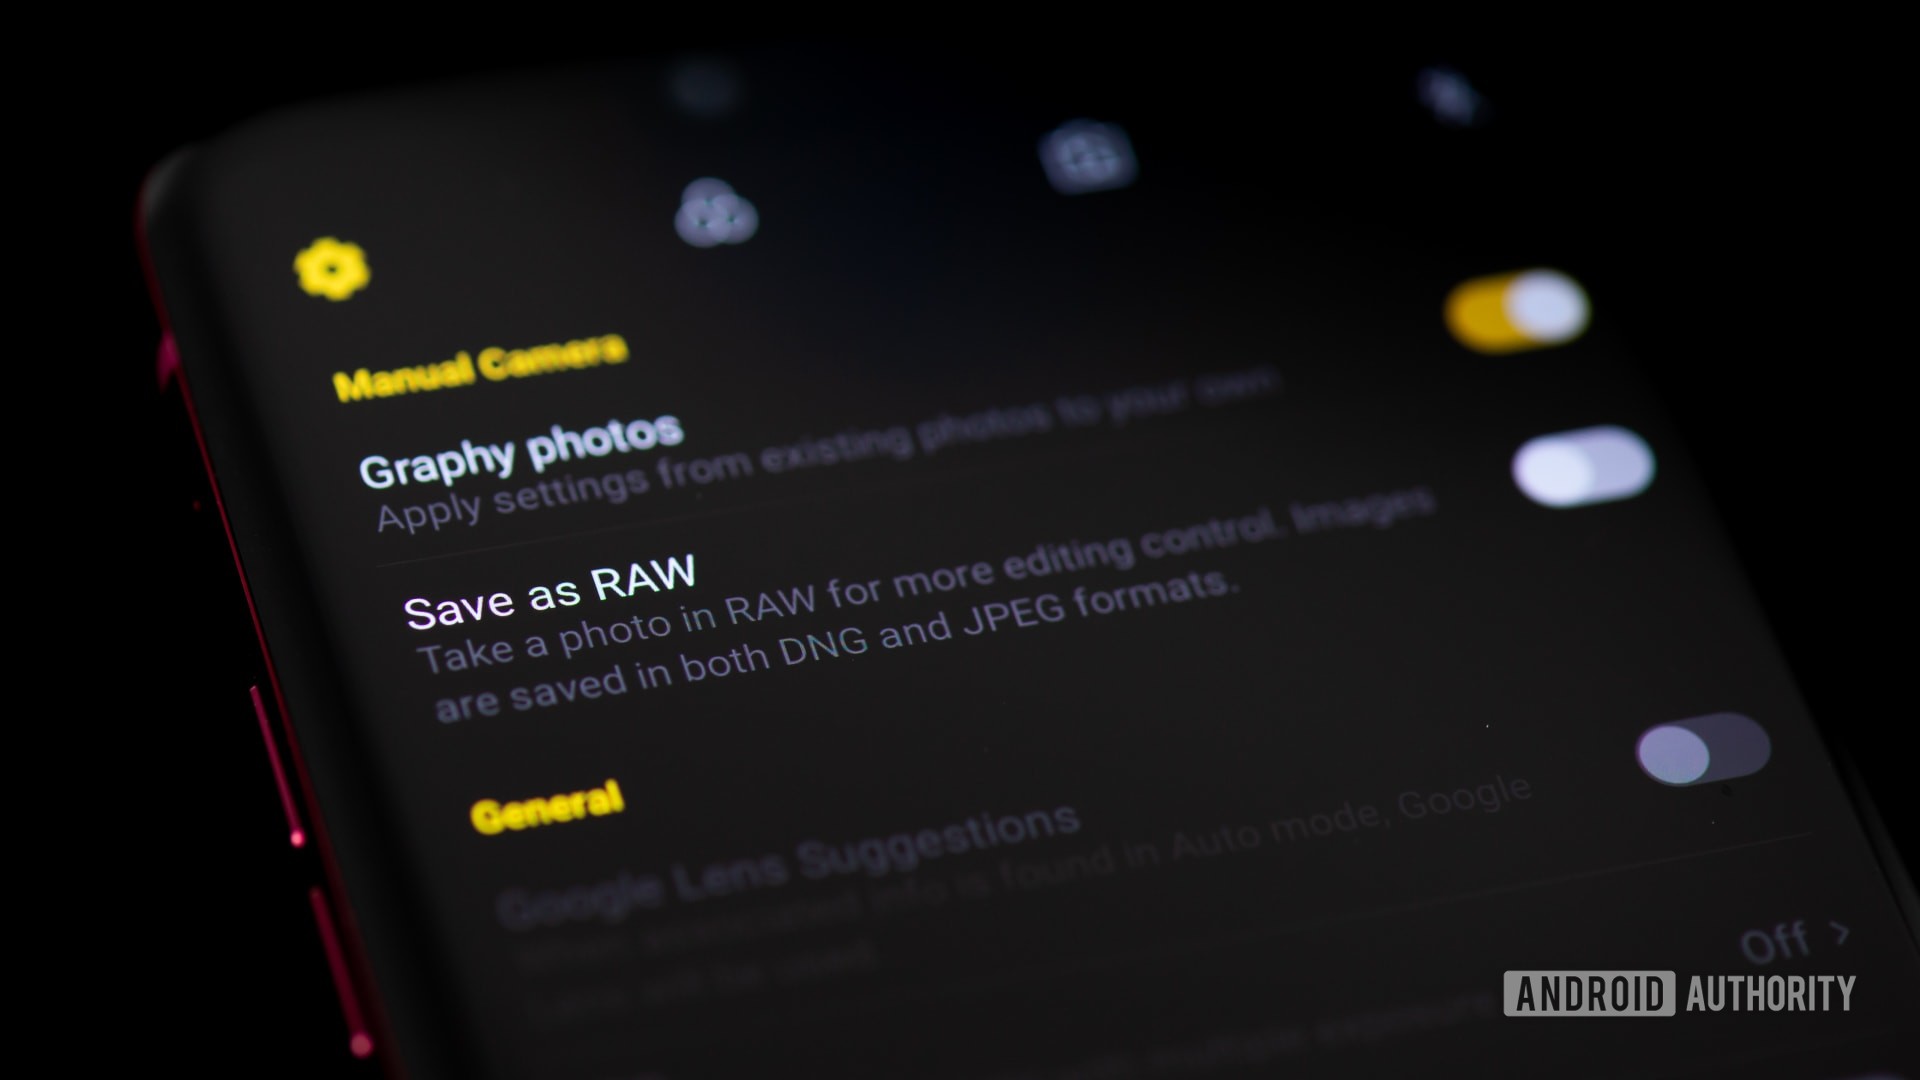 RAW photography option in smartphone camera settings